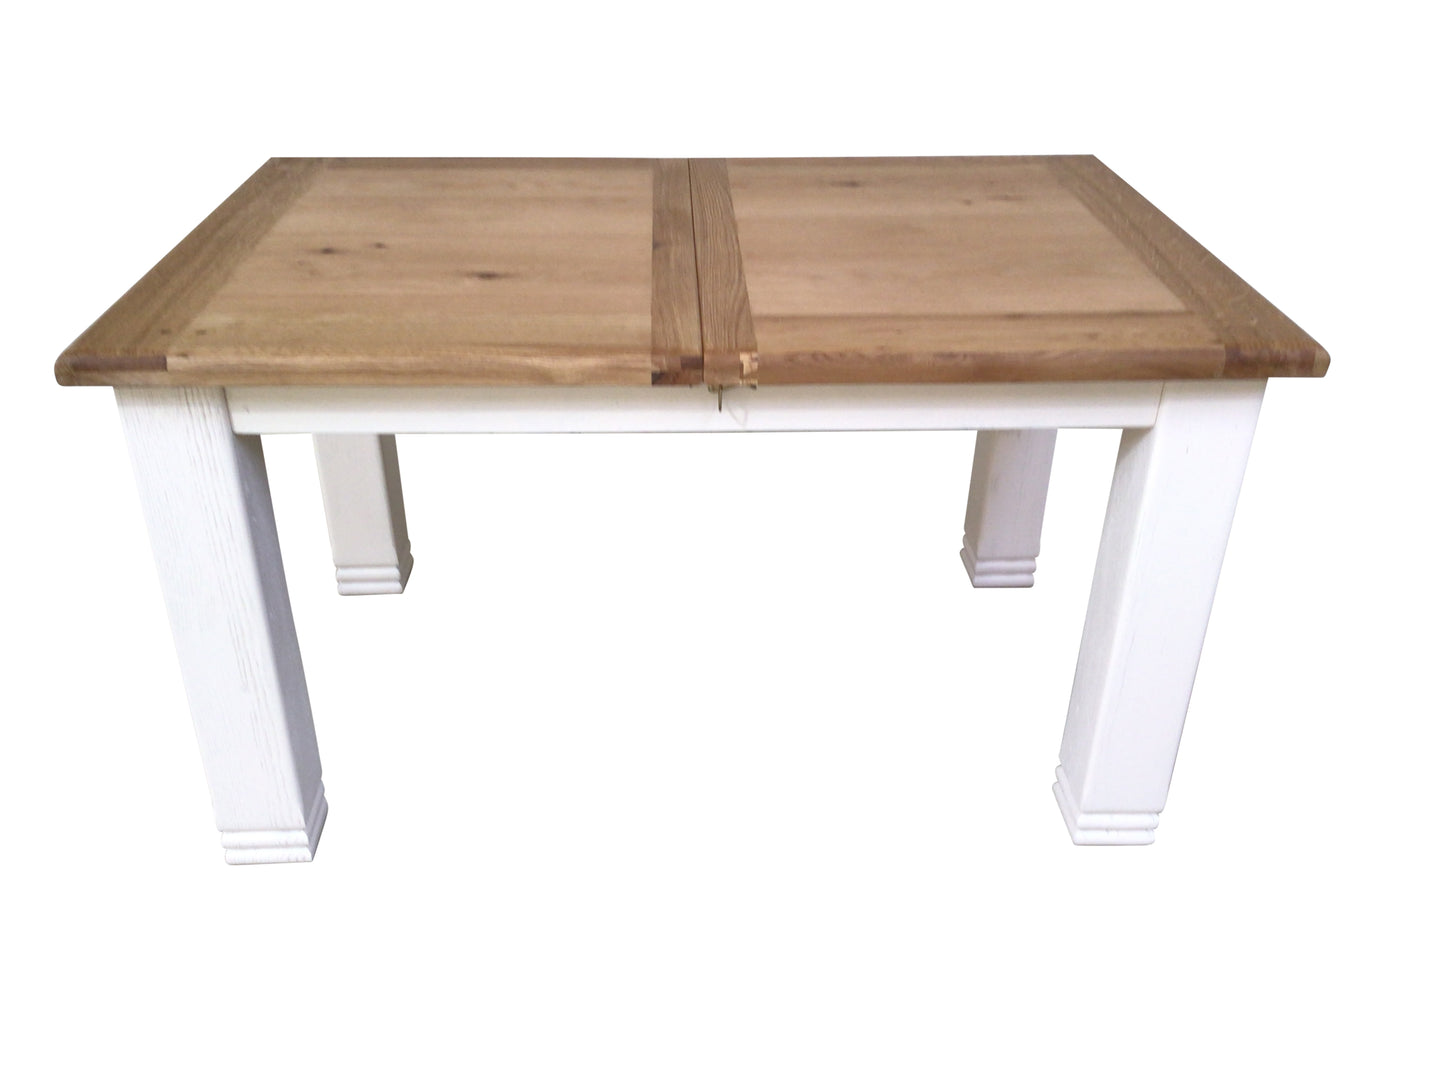 Danube 1.4m Oak extension table painted Off-White